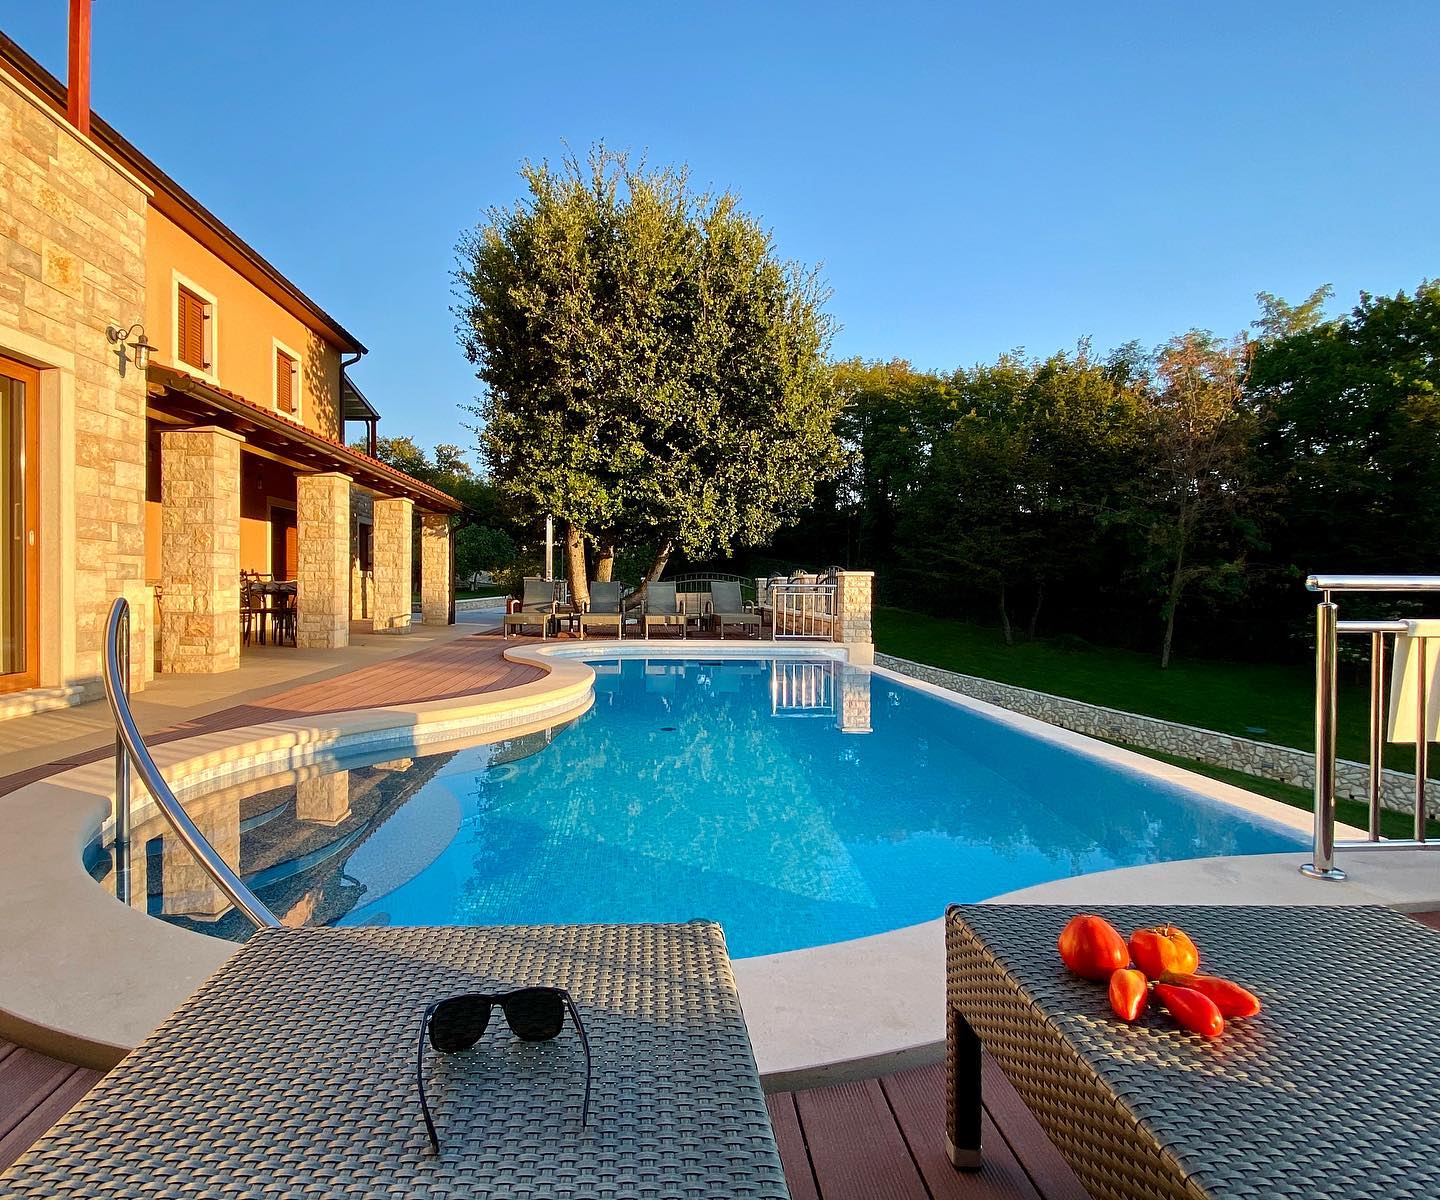 Two holiday homes in Croatia win best in Europe awards